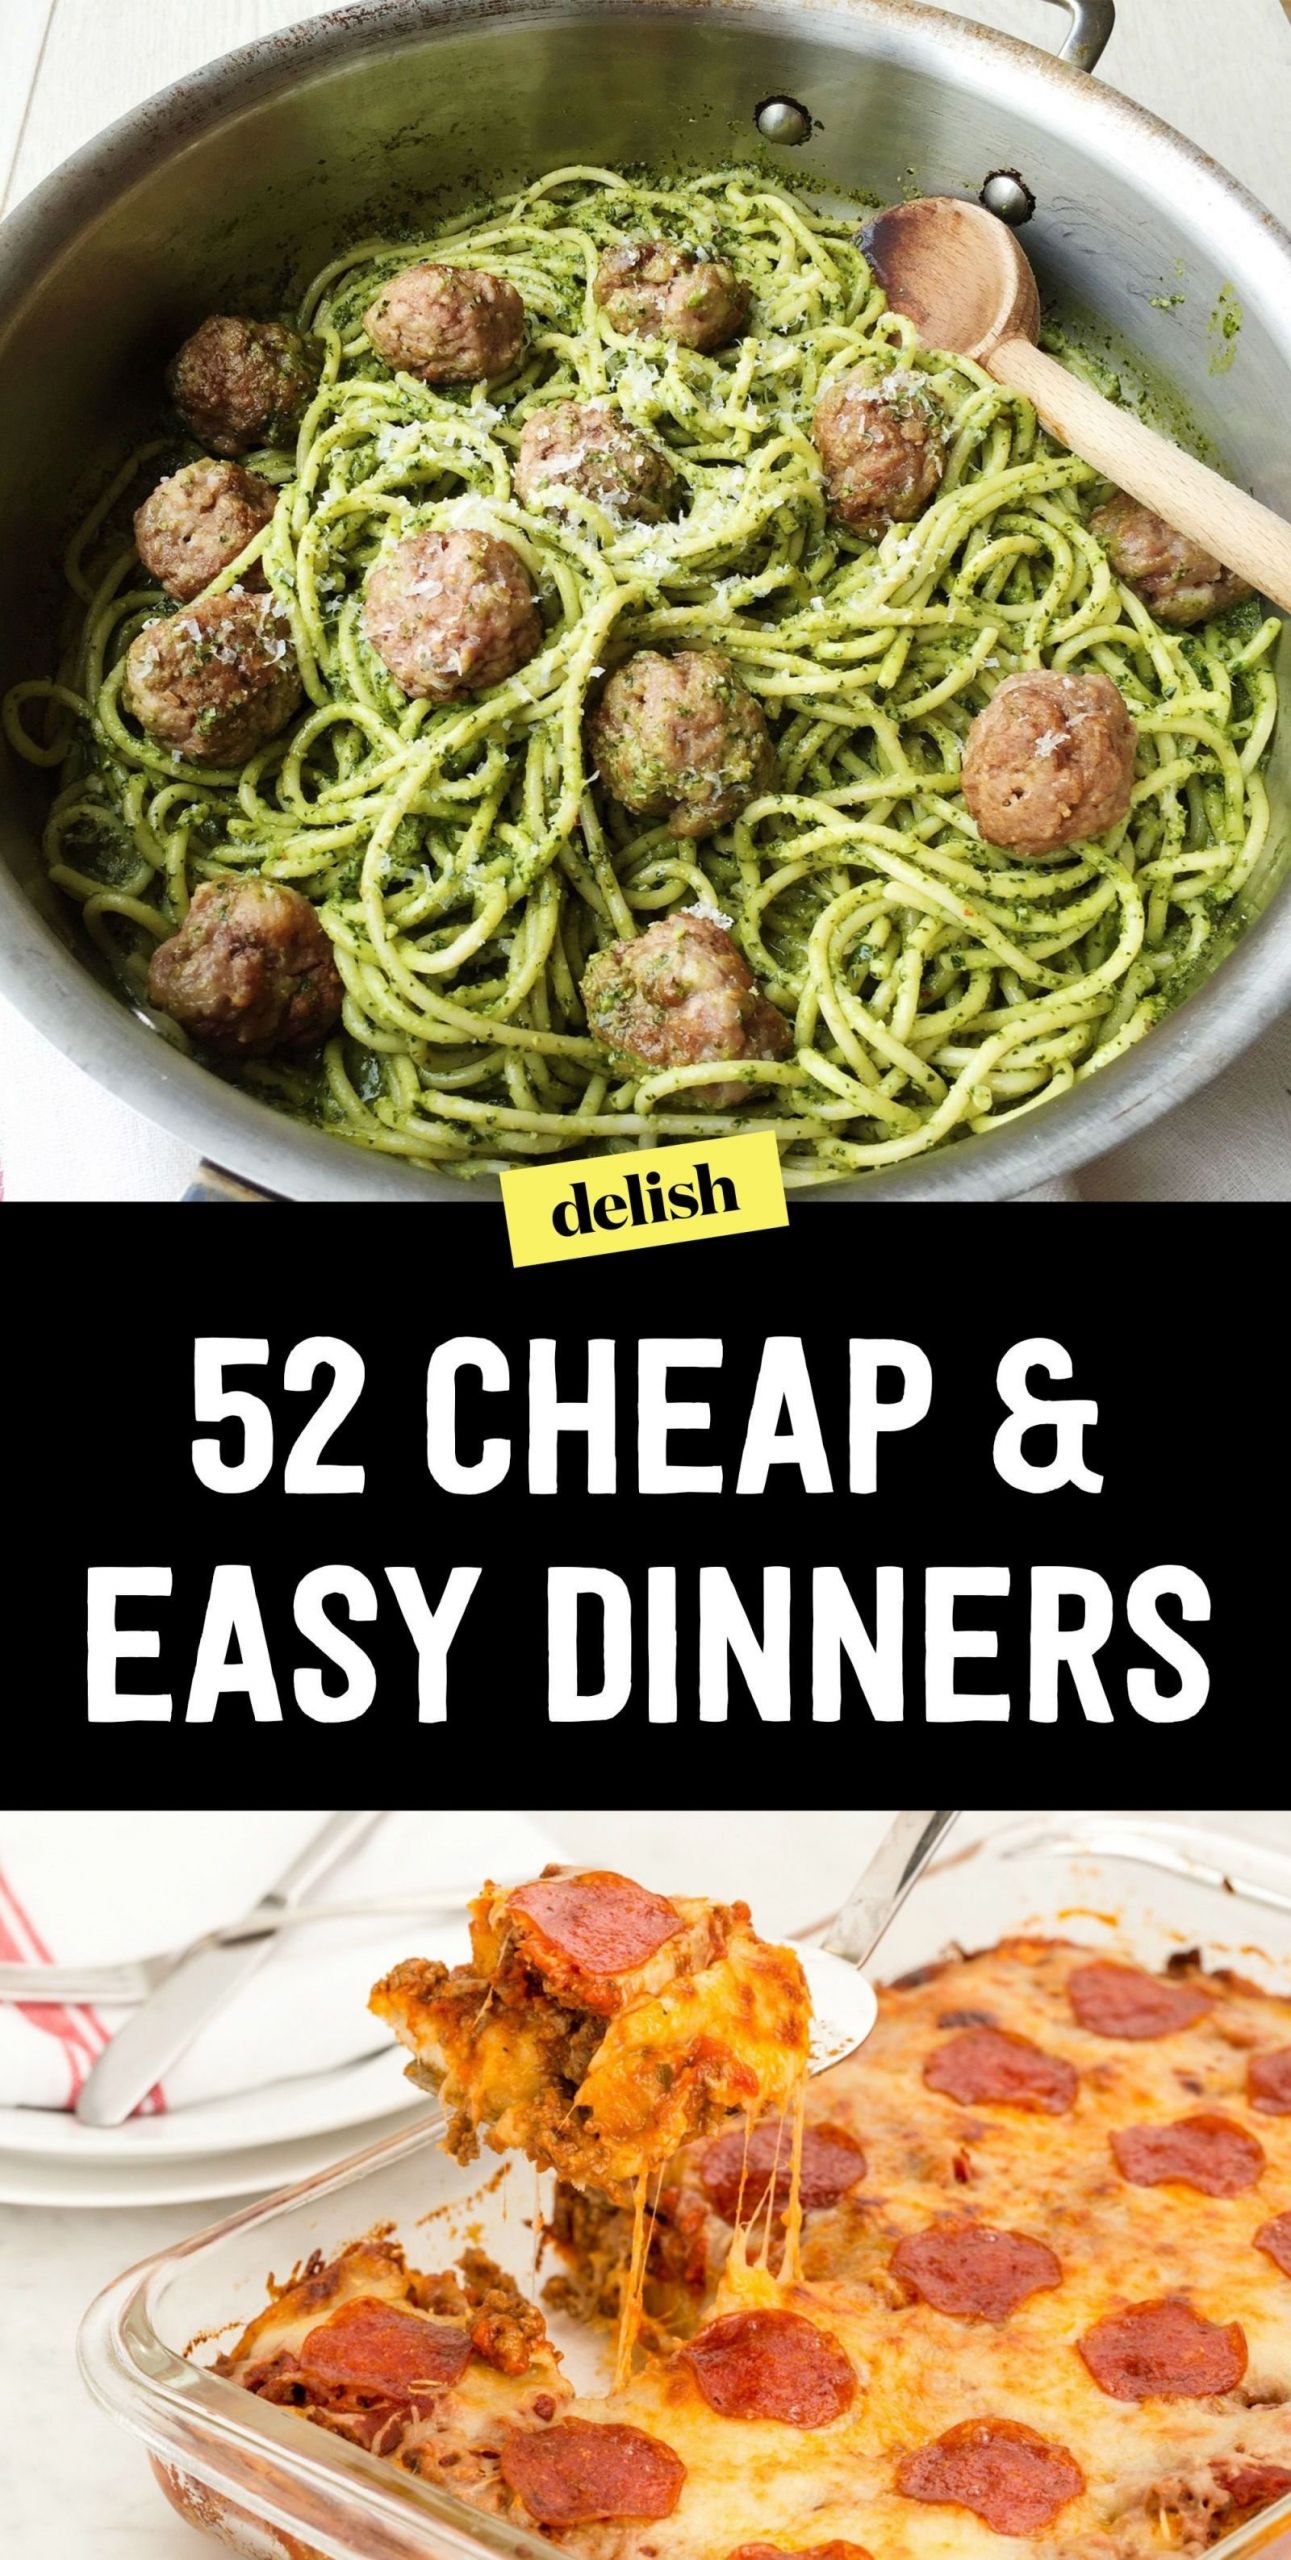 Inexpensive Dinner Ideas
 10 Great Cheap Meal Ideas For 2 2019